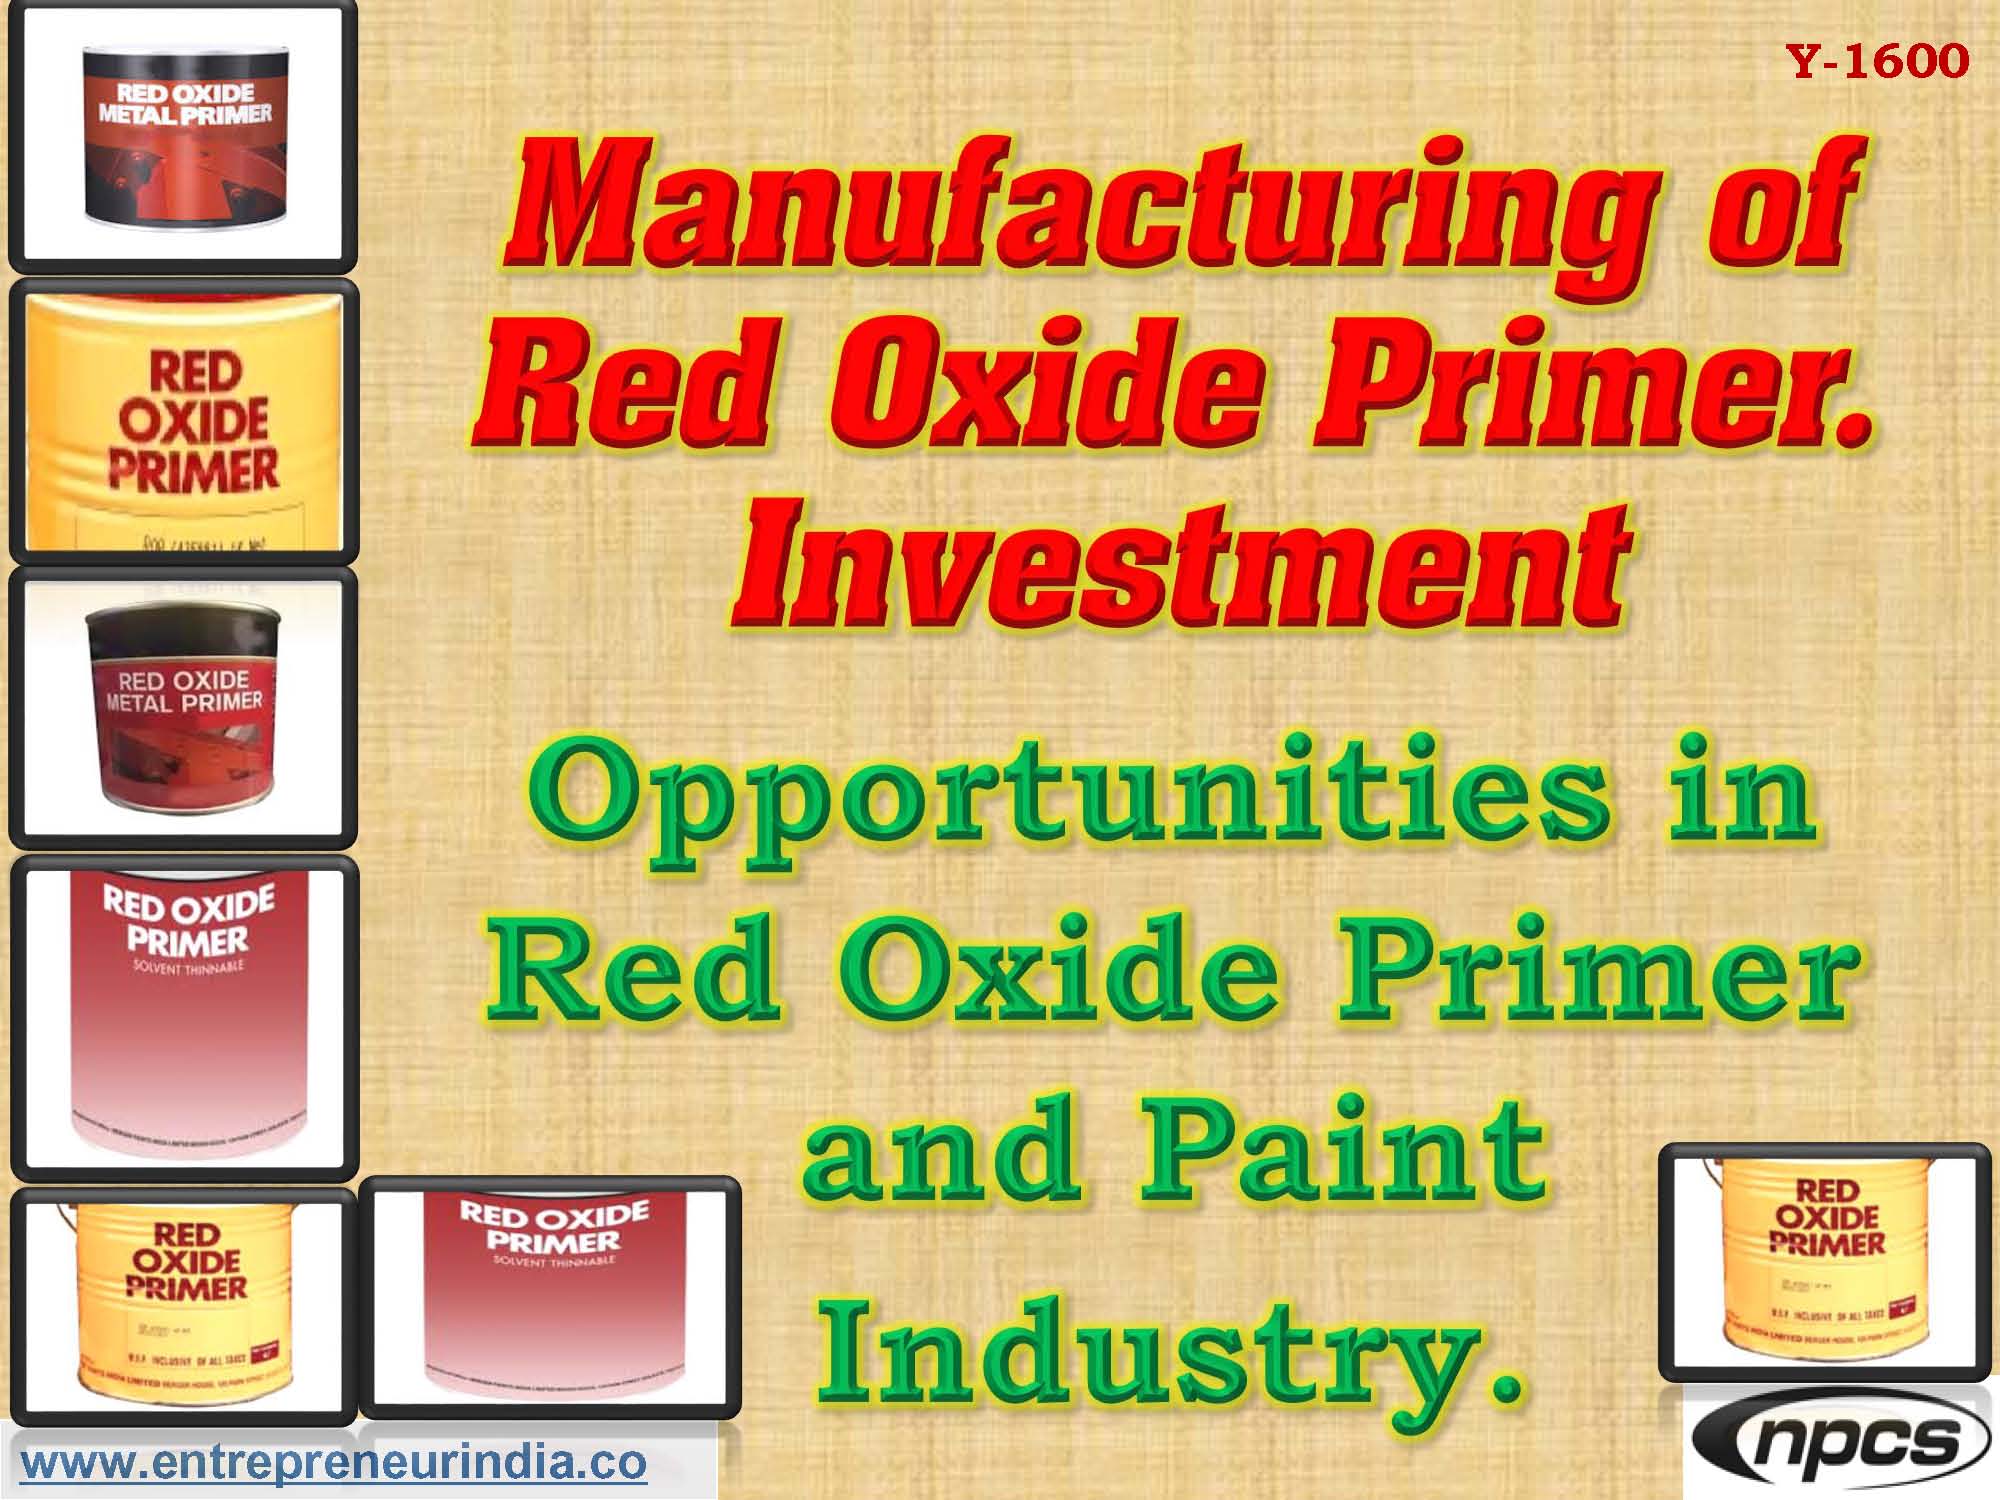 A Guide to Using Red Oxide Metal Primer